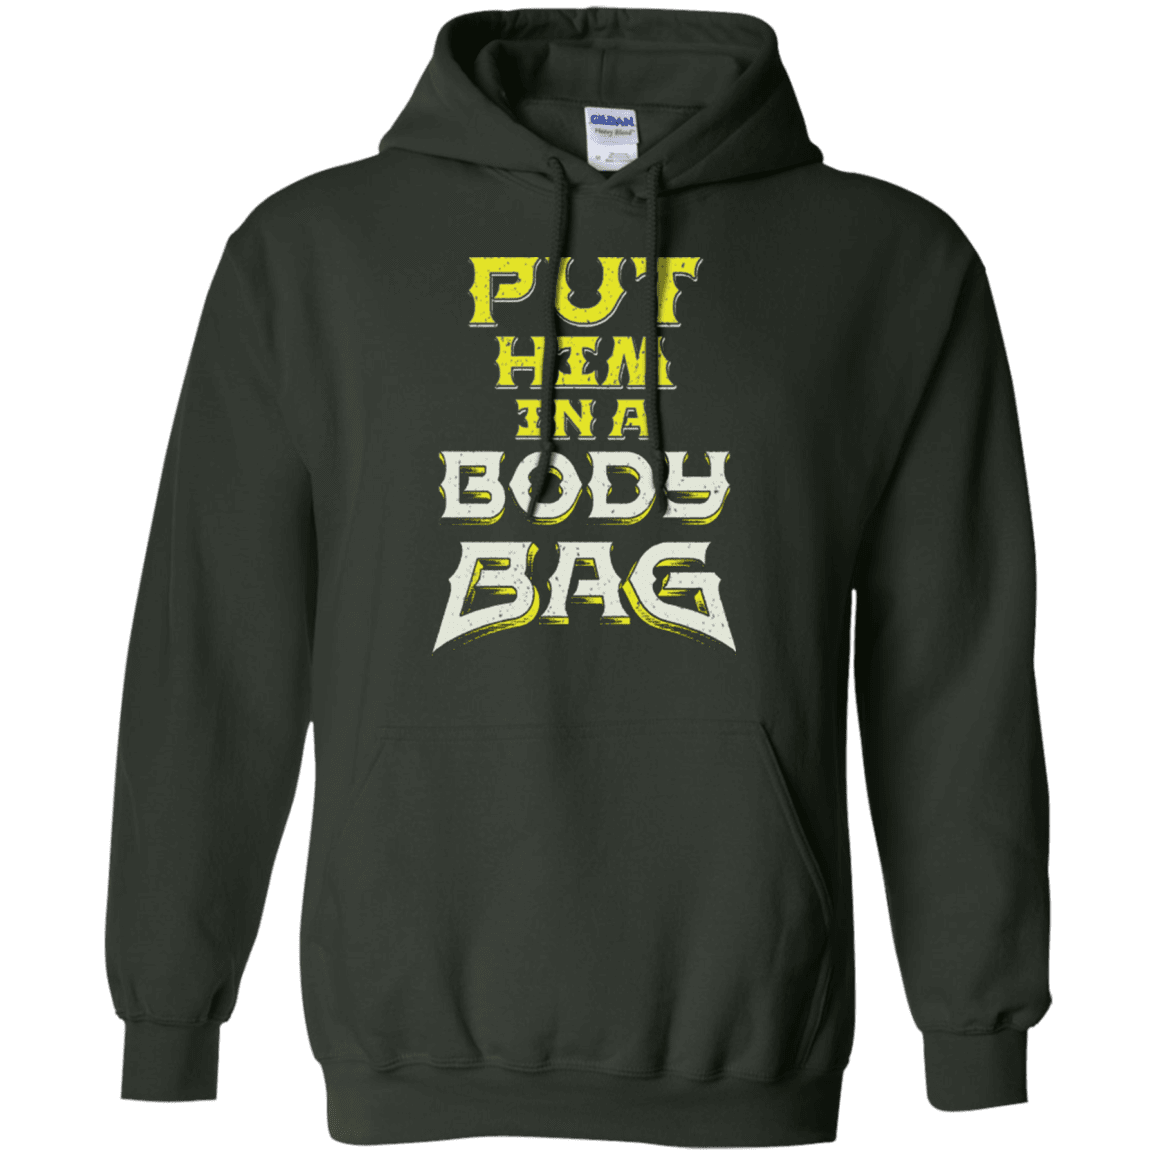 Sweatshirts Forest Green / S BODY BAG Pullover Hoodie